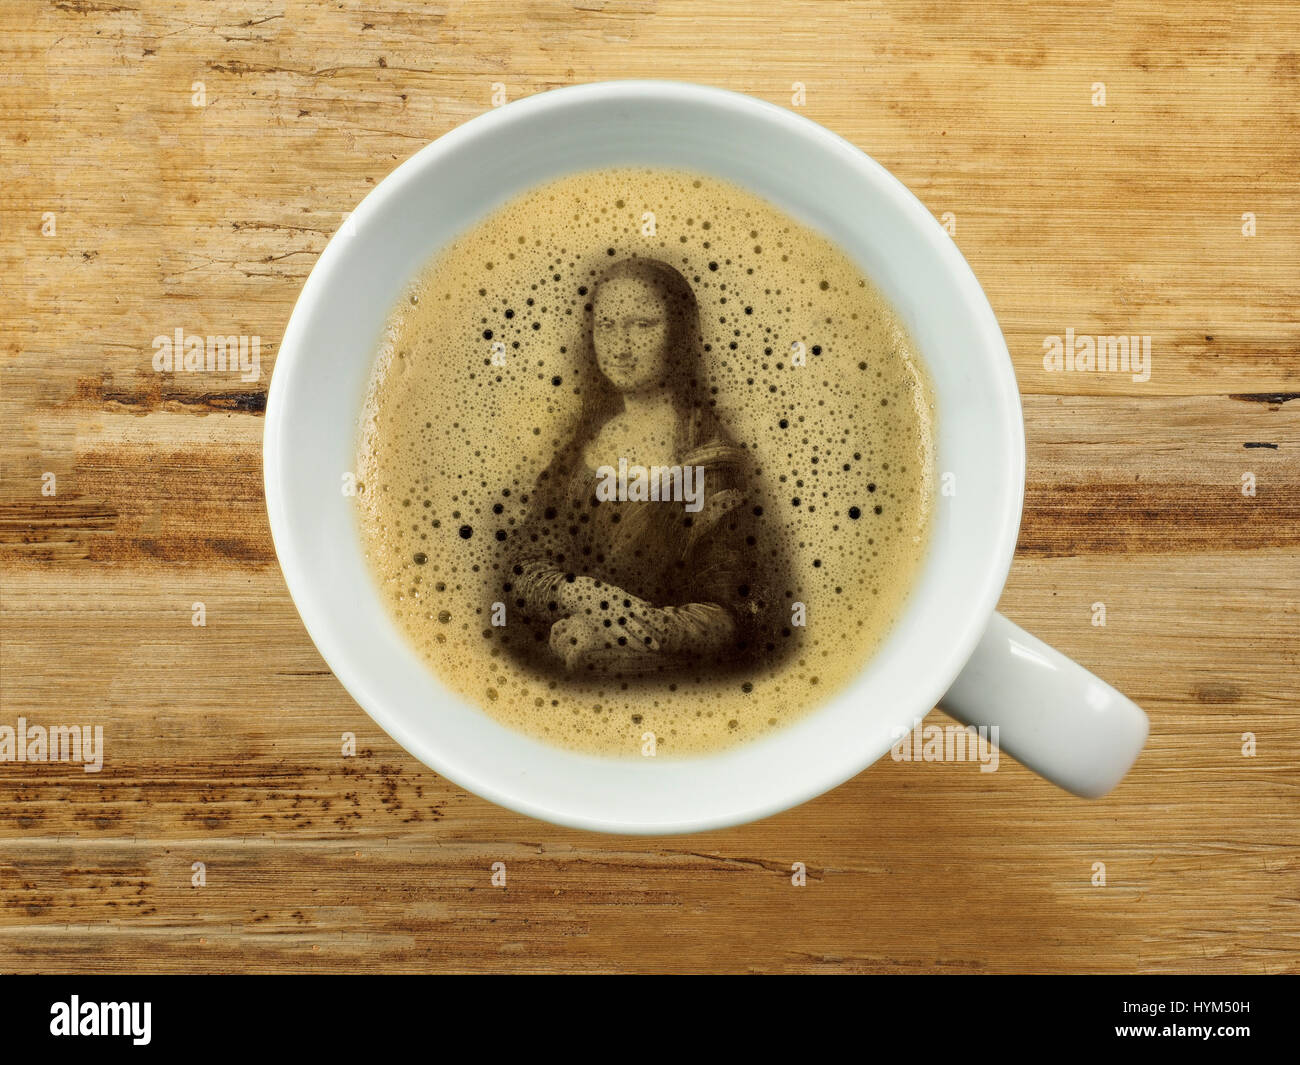 Mona lisa in coffee froth Stock Photo